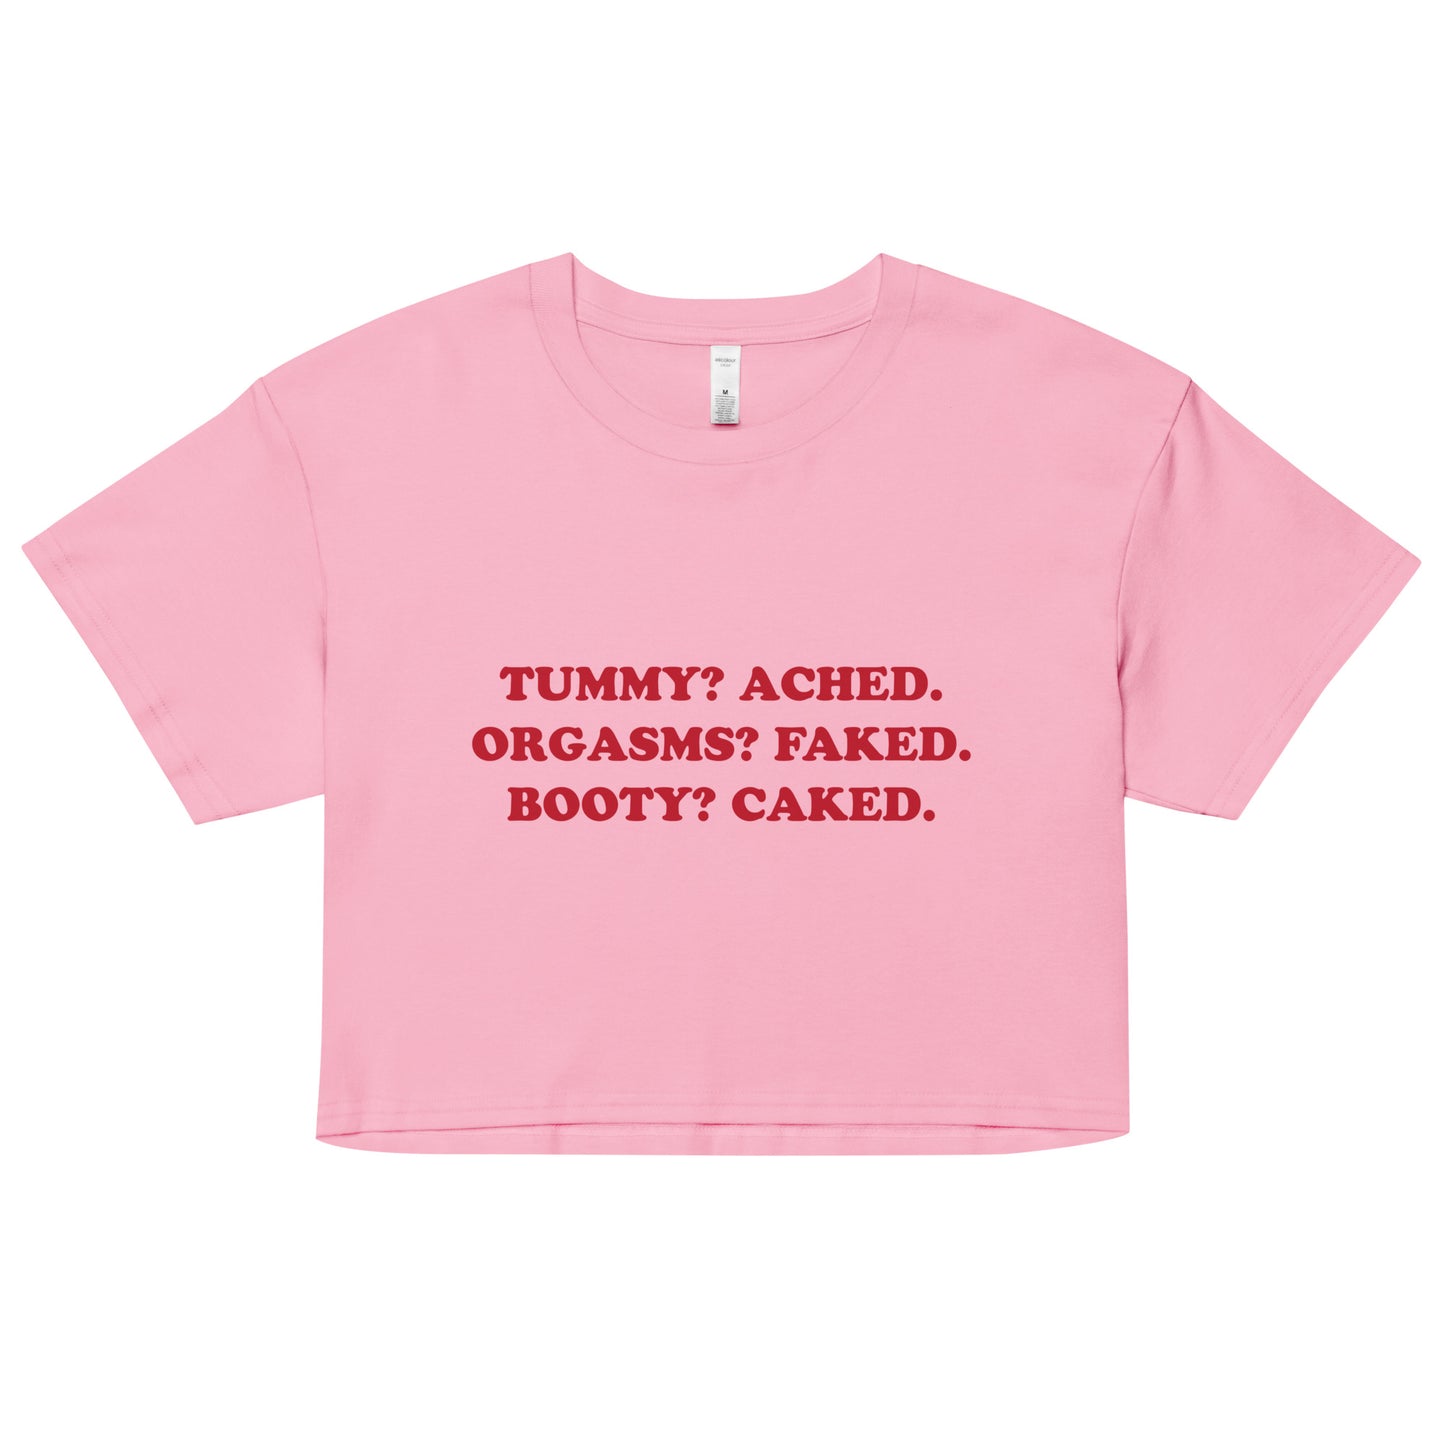 Tummy Ached Booty Caked crop top